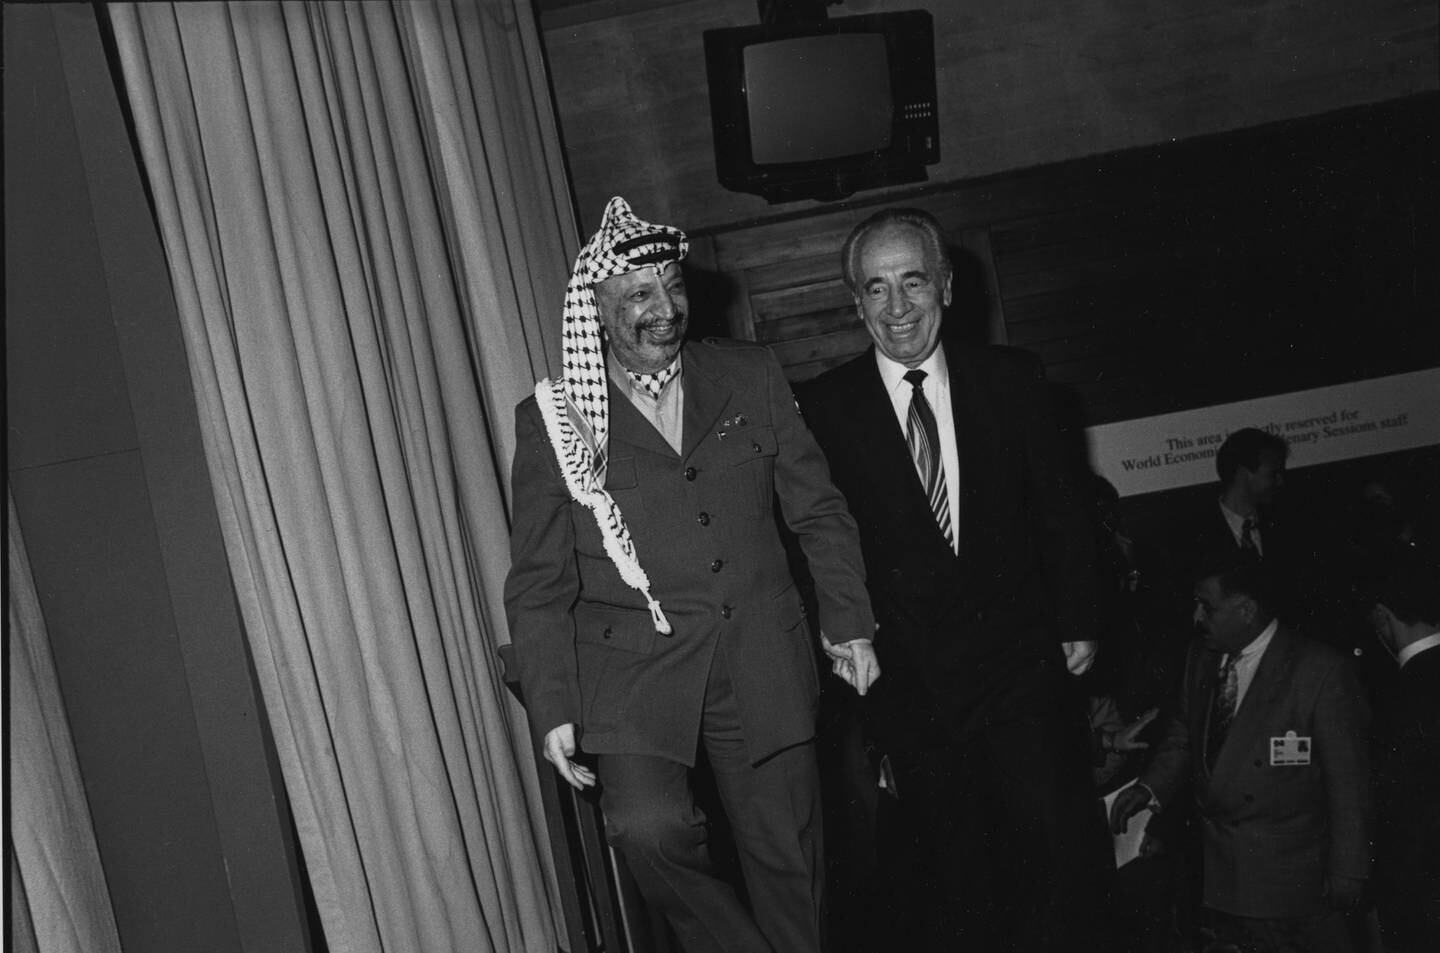 Former PLO chairman Yasser Arafat with then Israeli foreign minister Shimon Peres in Davos in 1994. World Economic Forum